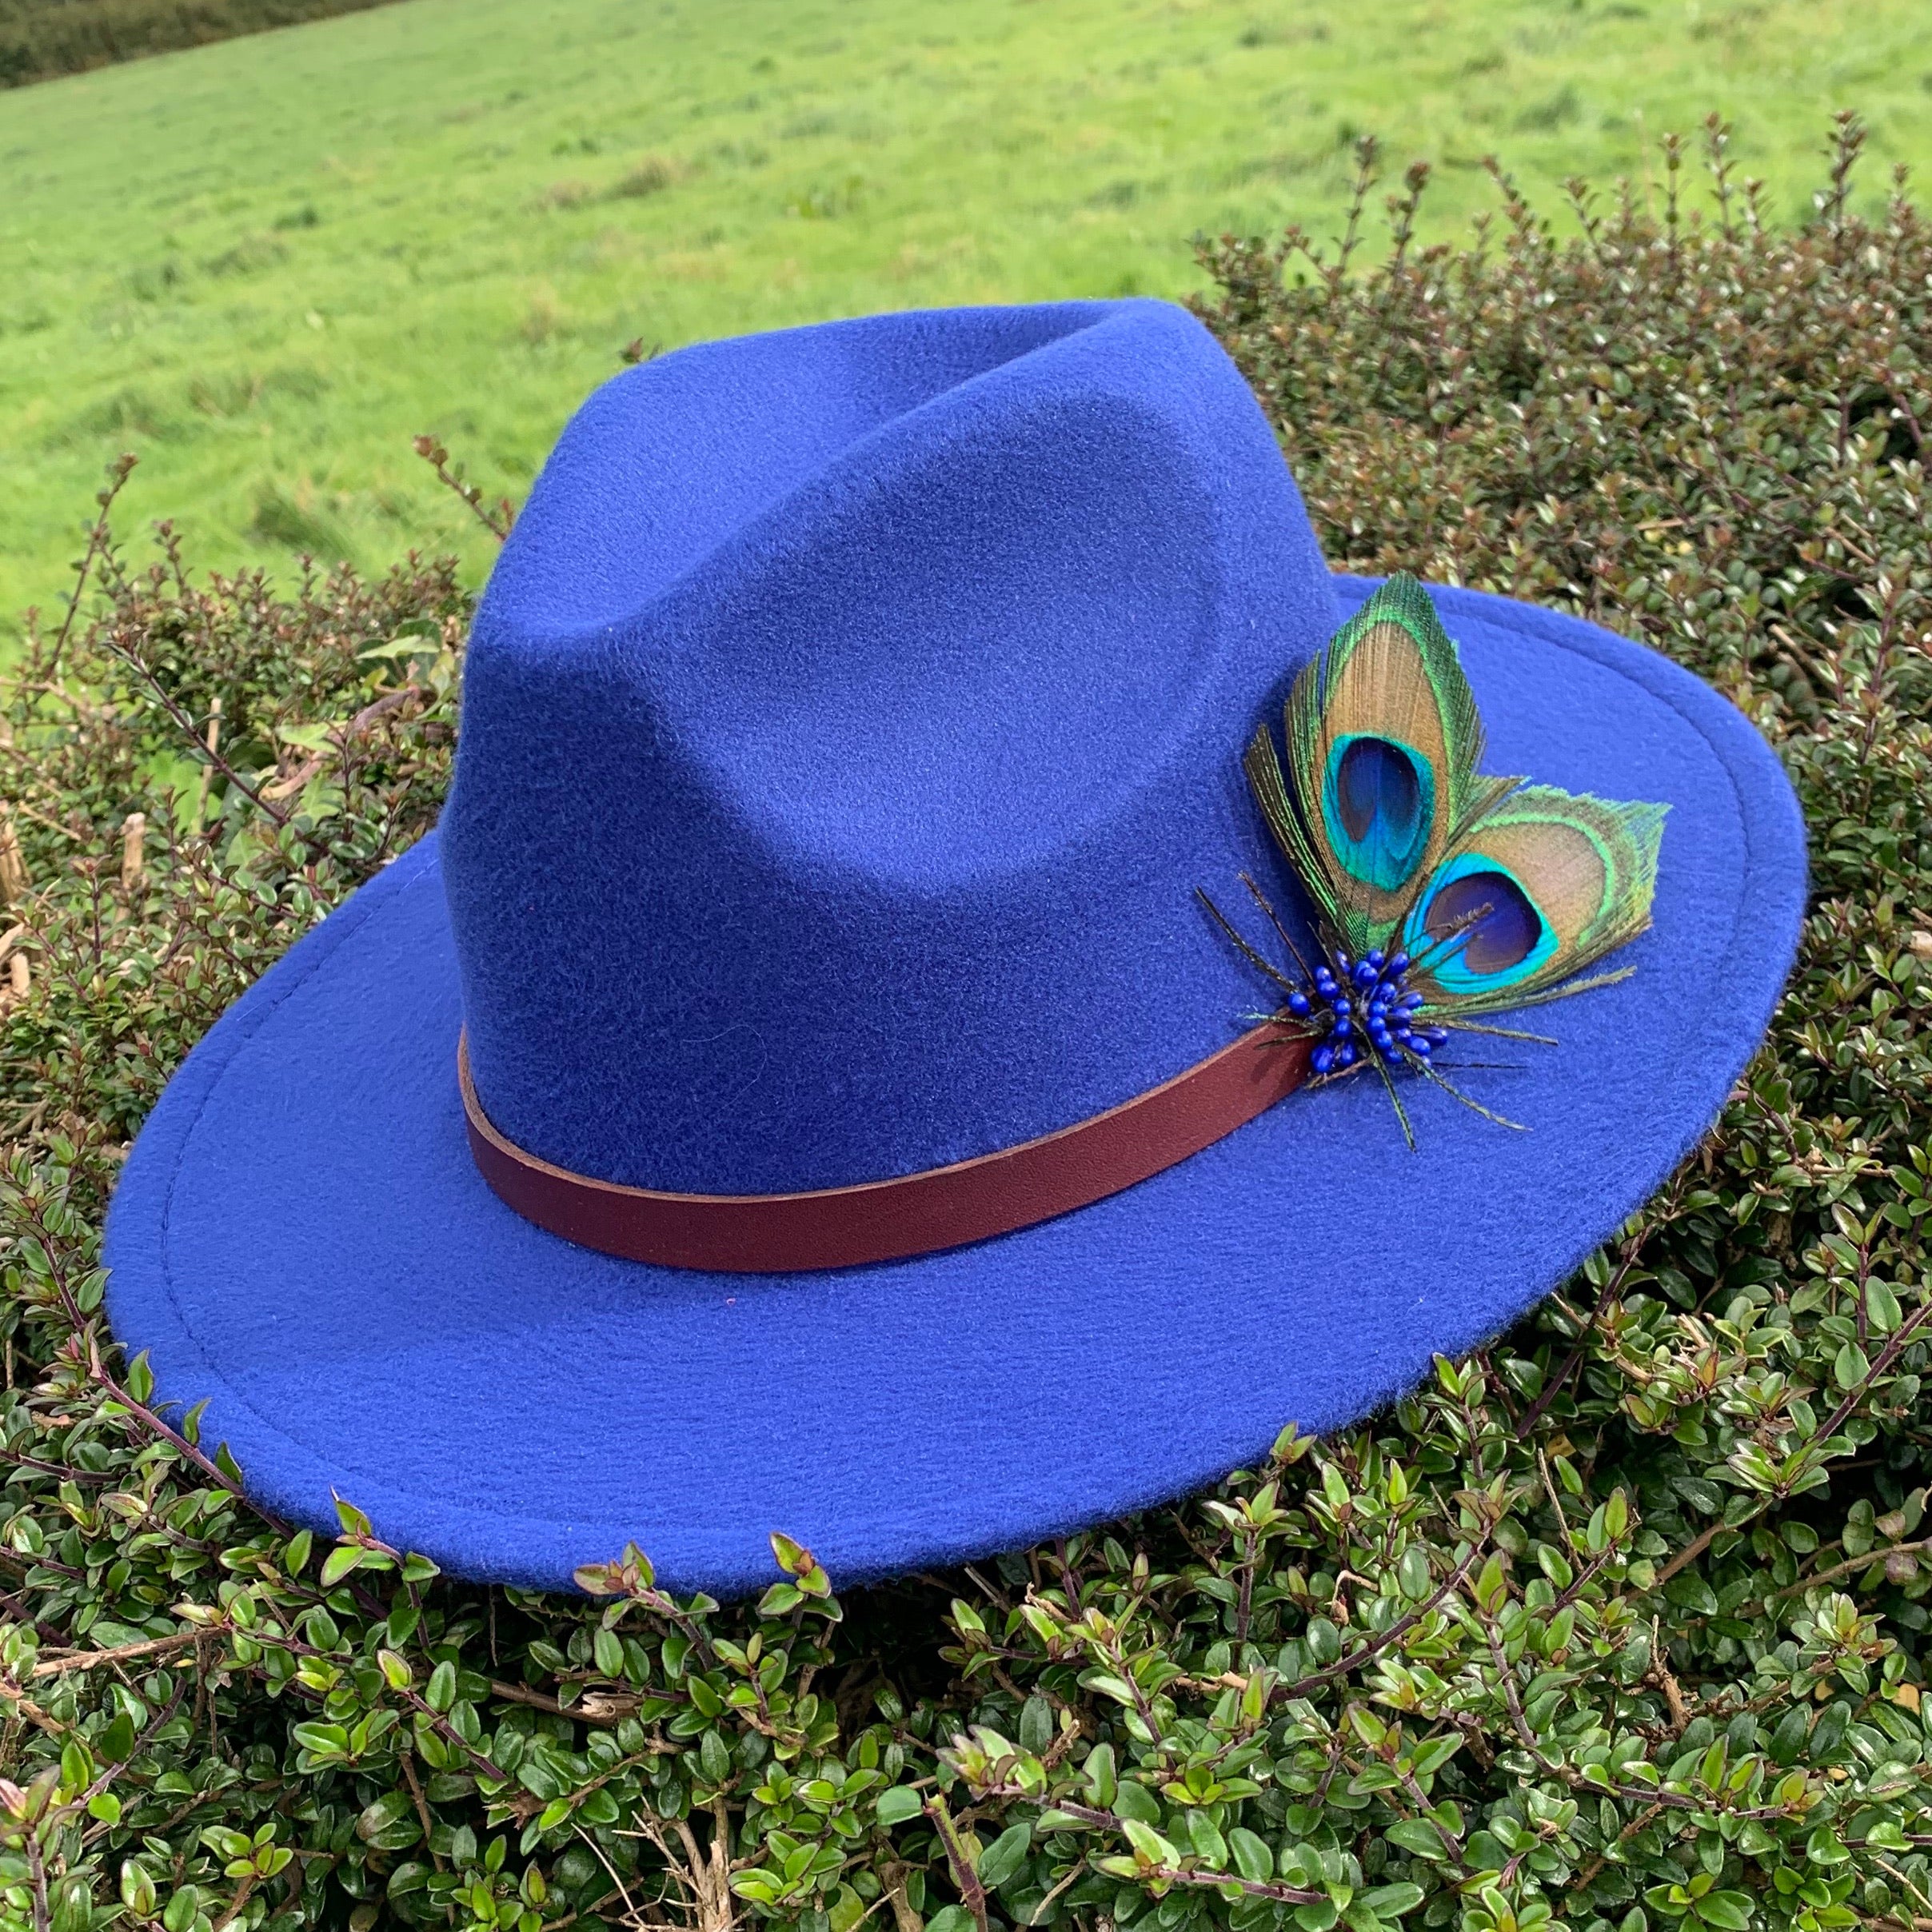 Royal blue fedora with peacock feathers